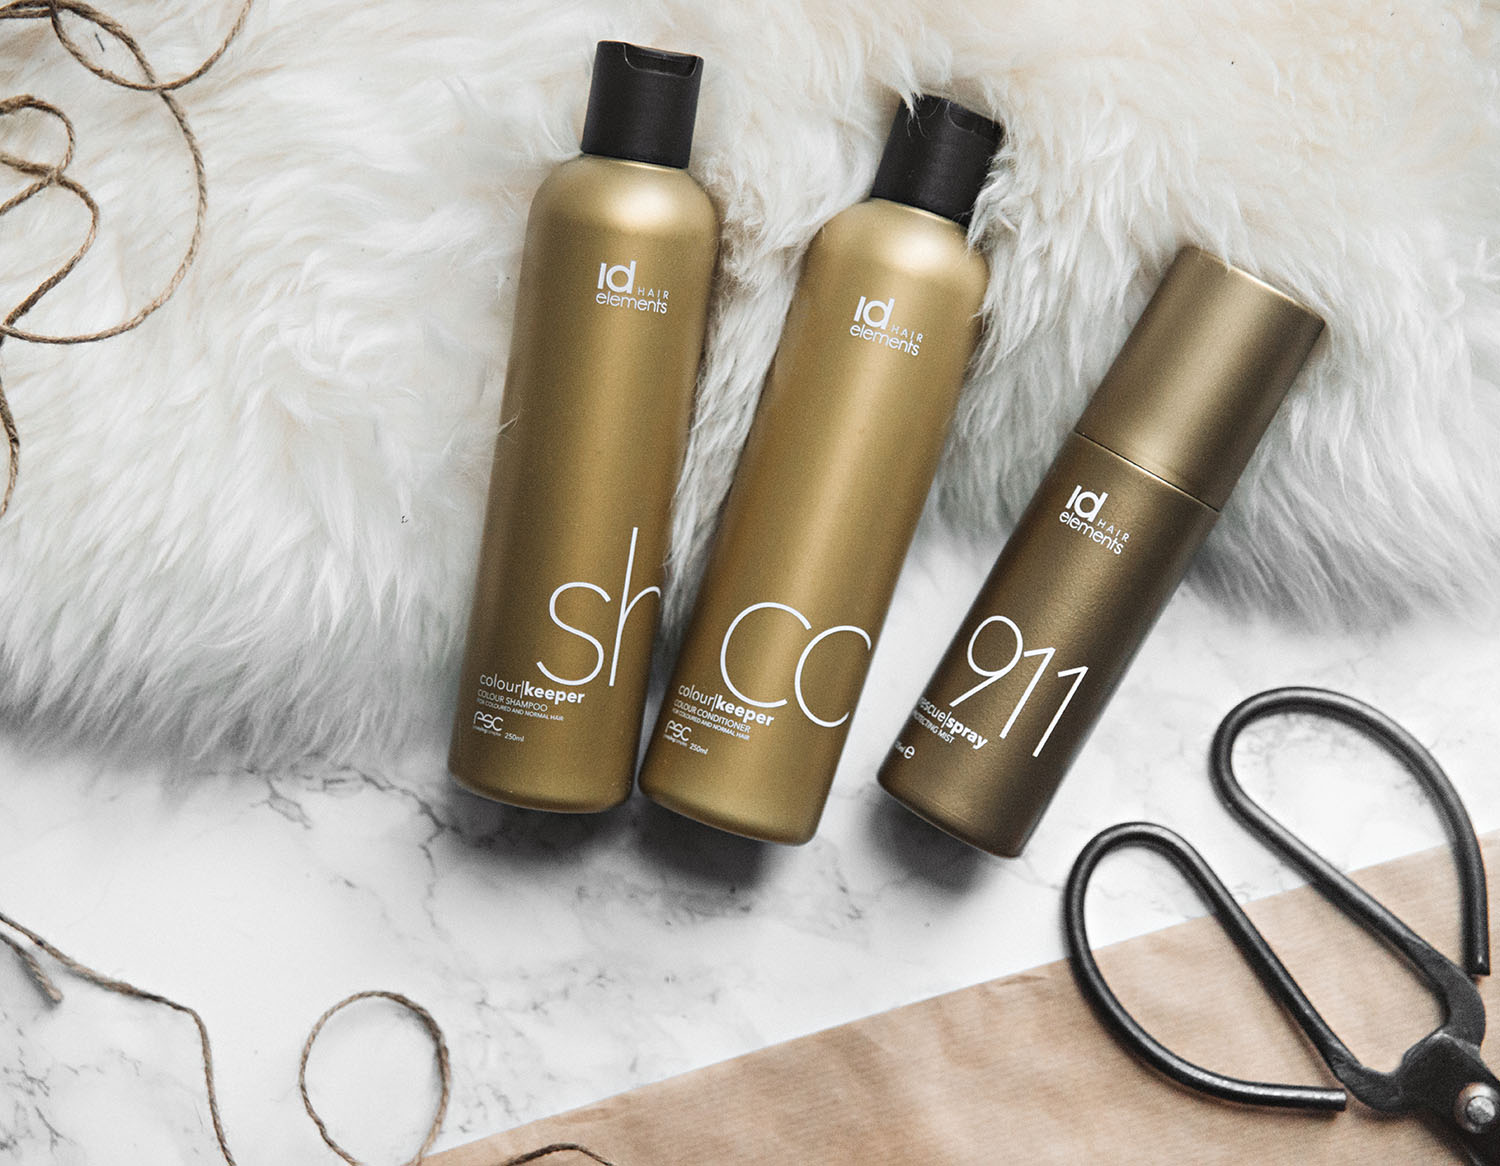 Id HAIR Colour Keeper Shampoo, Conditioner & Rescue Spray + Tangle Teezer